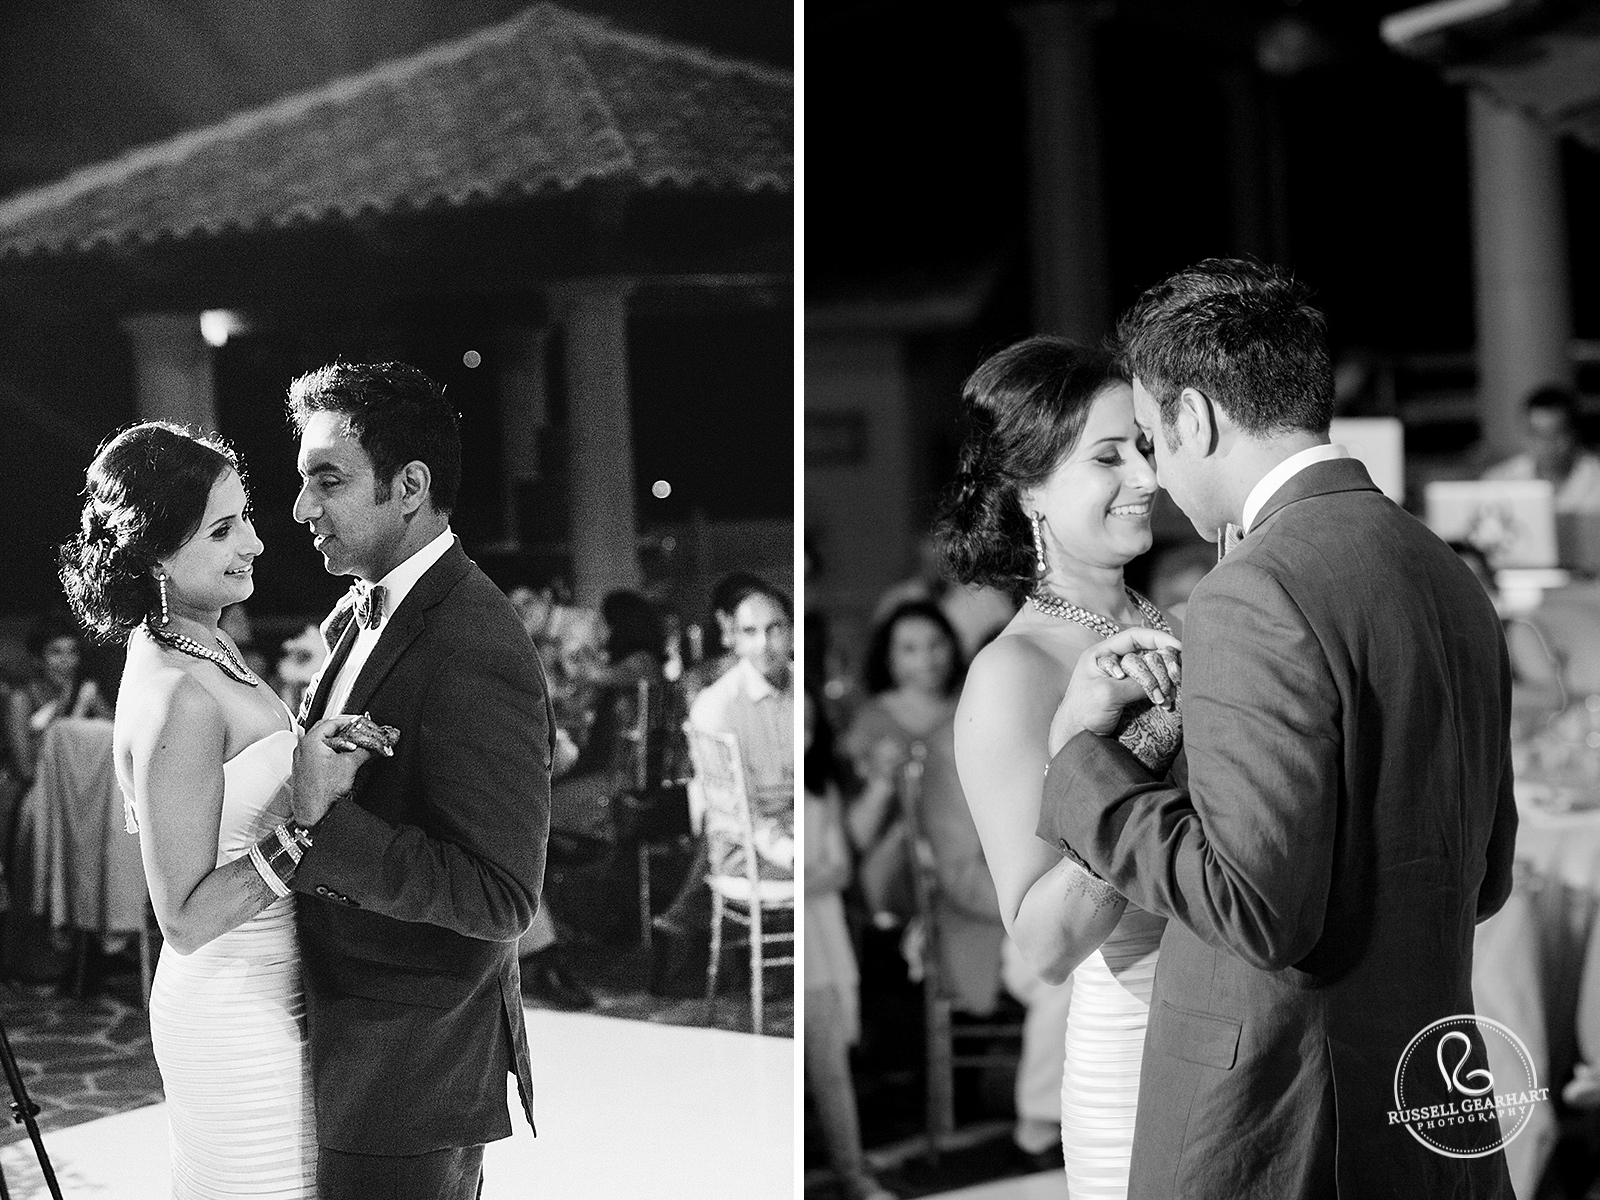 First Dance – Mexico Destination Wedding – Russell Gearhart Photography – www.gearhartphoto.com